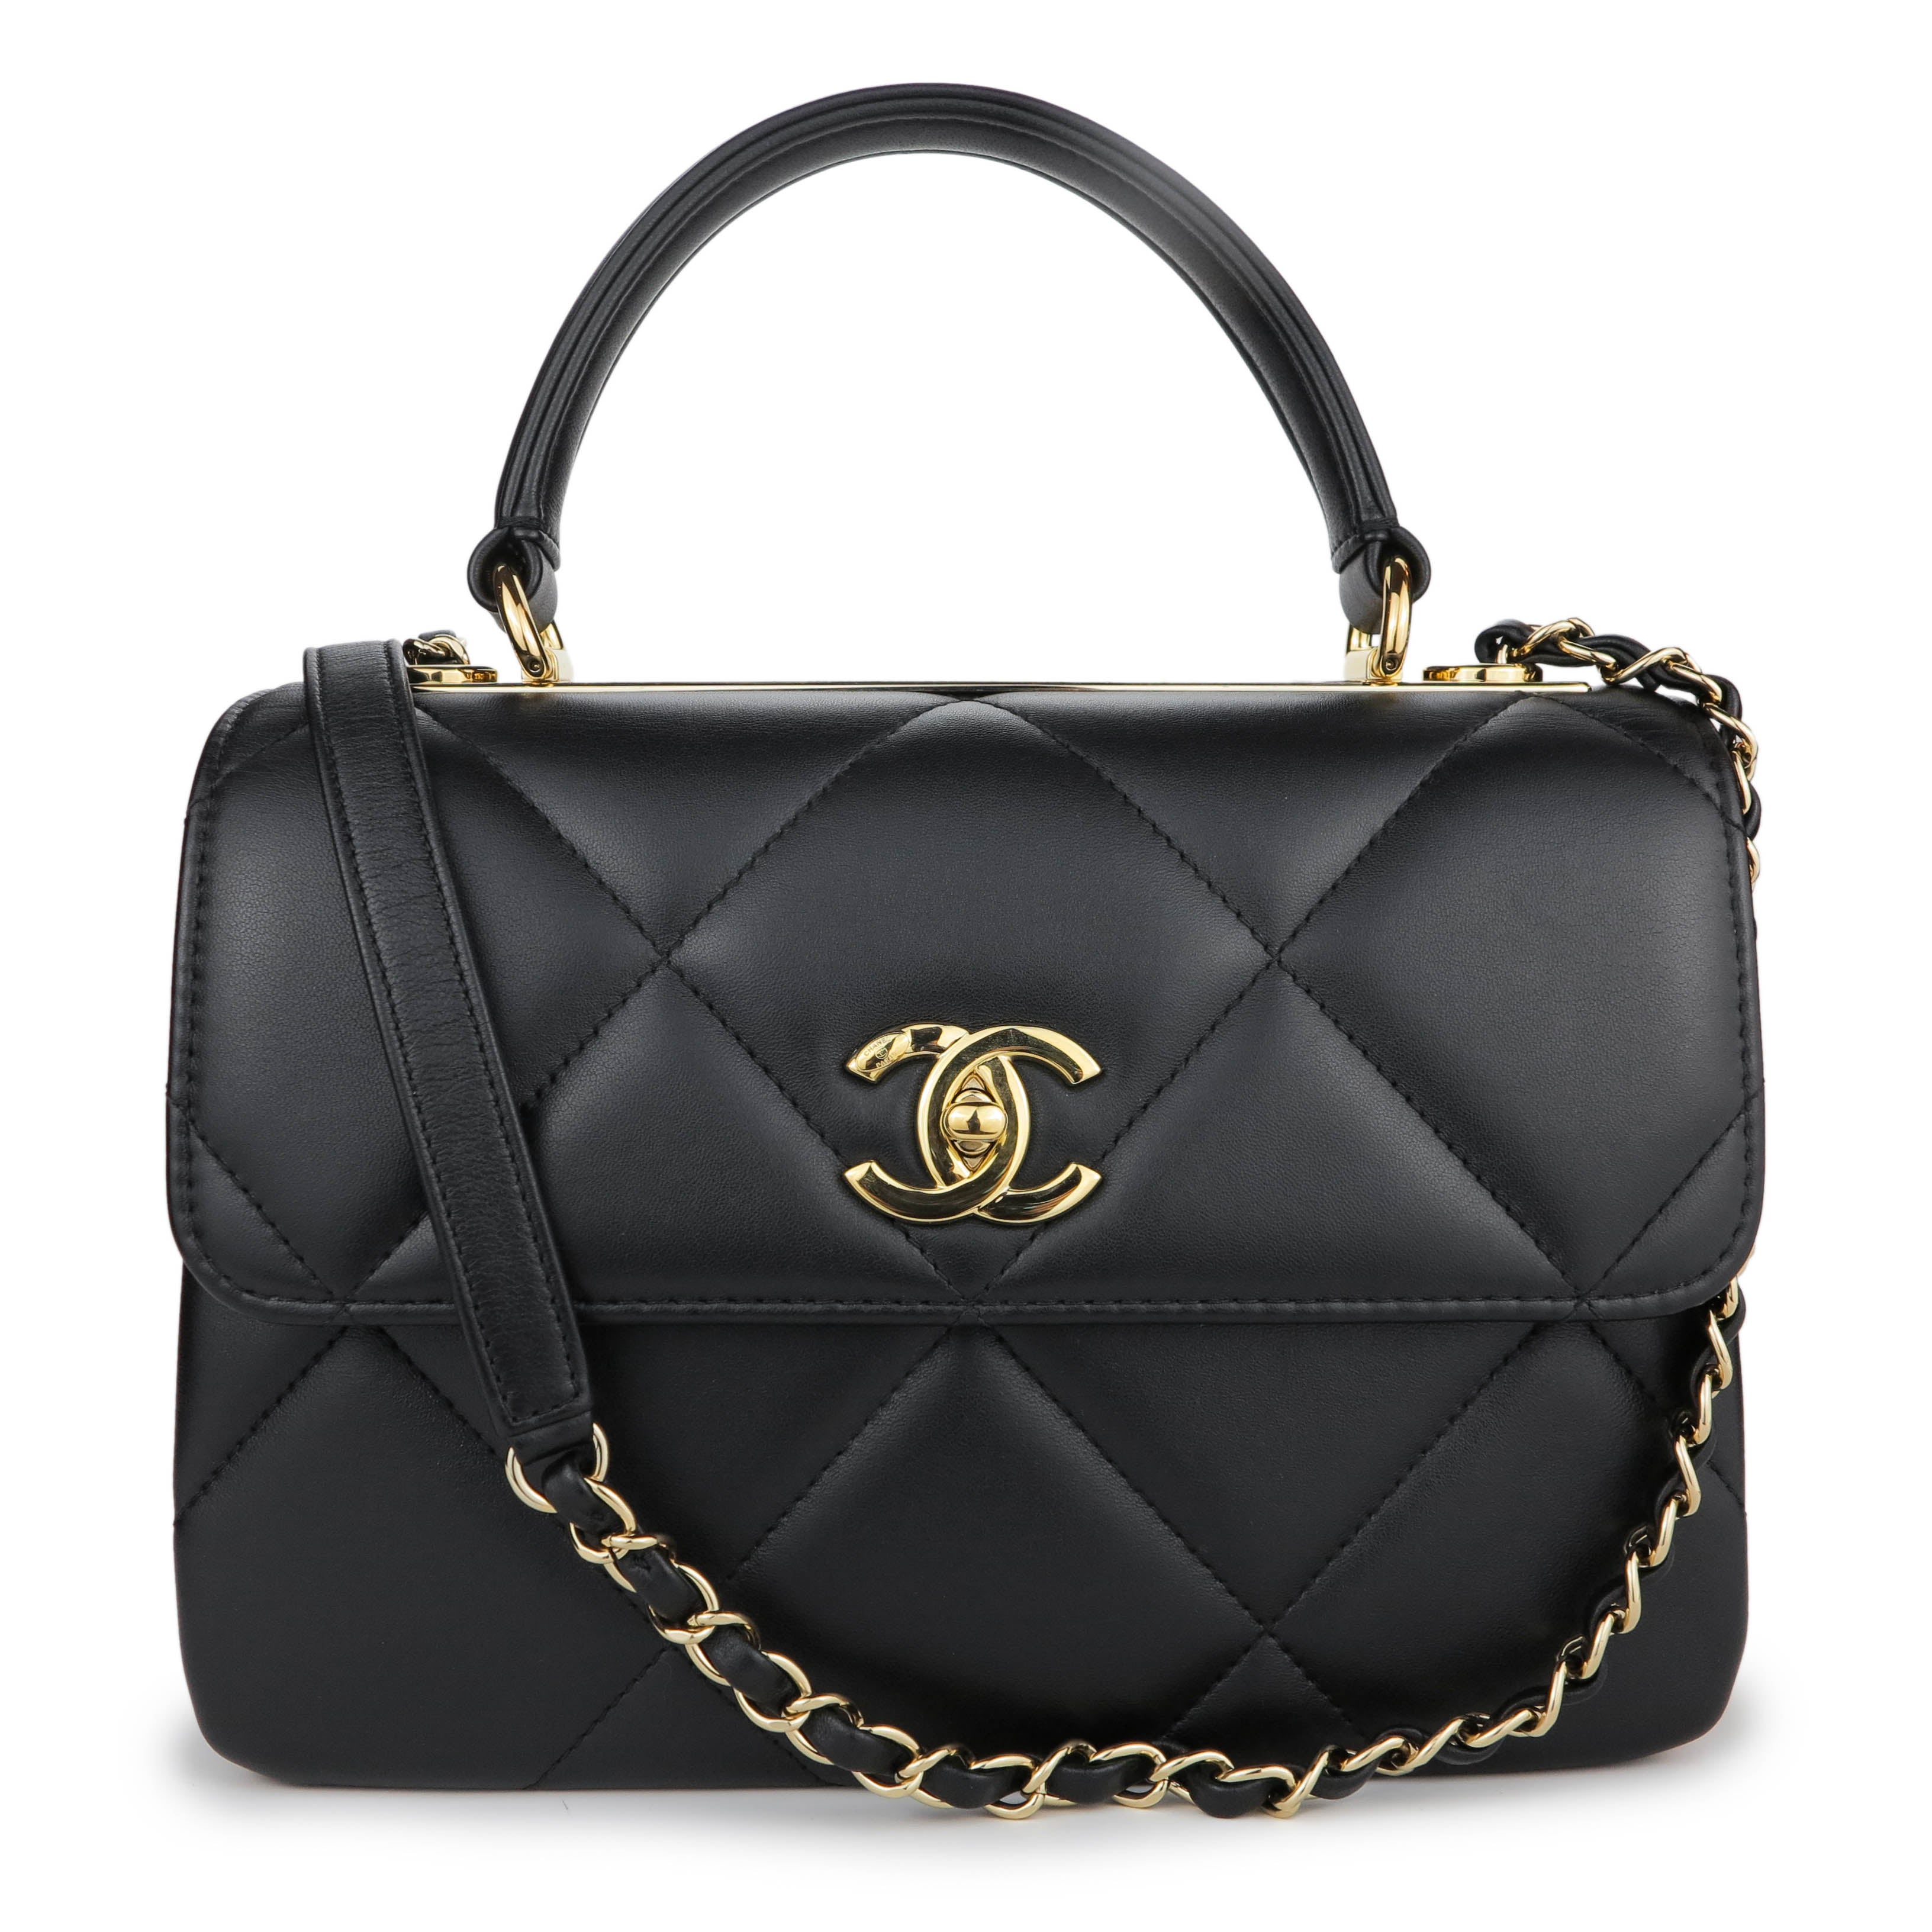 CHANEL Small Trendy CC Flap Bag with Top Handle in Black